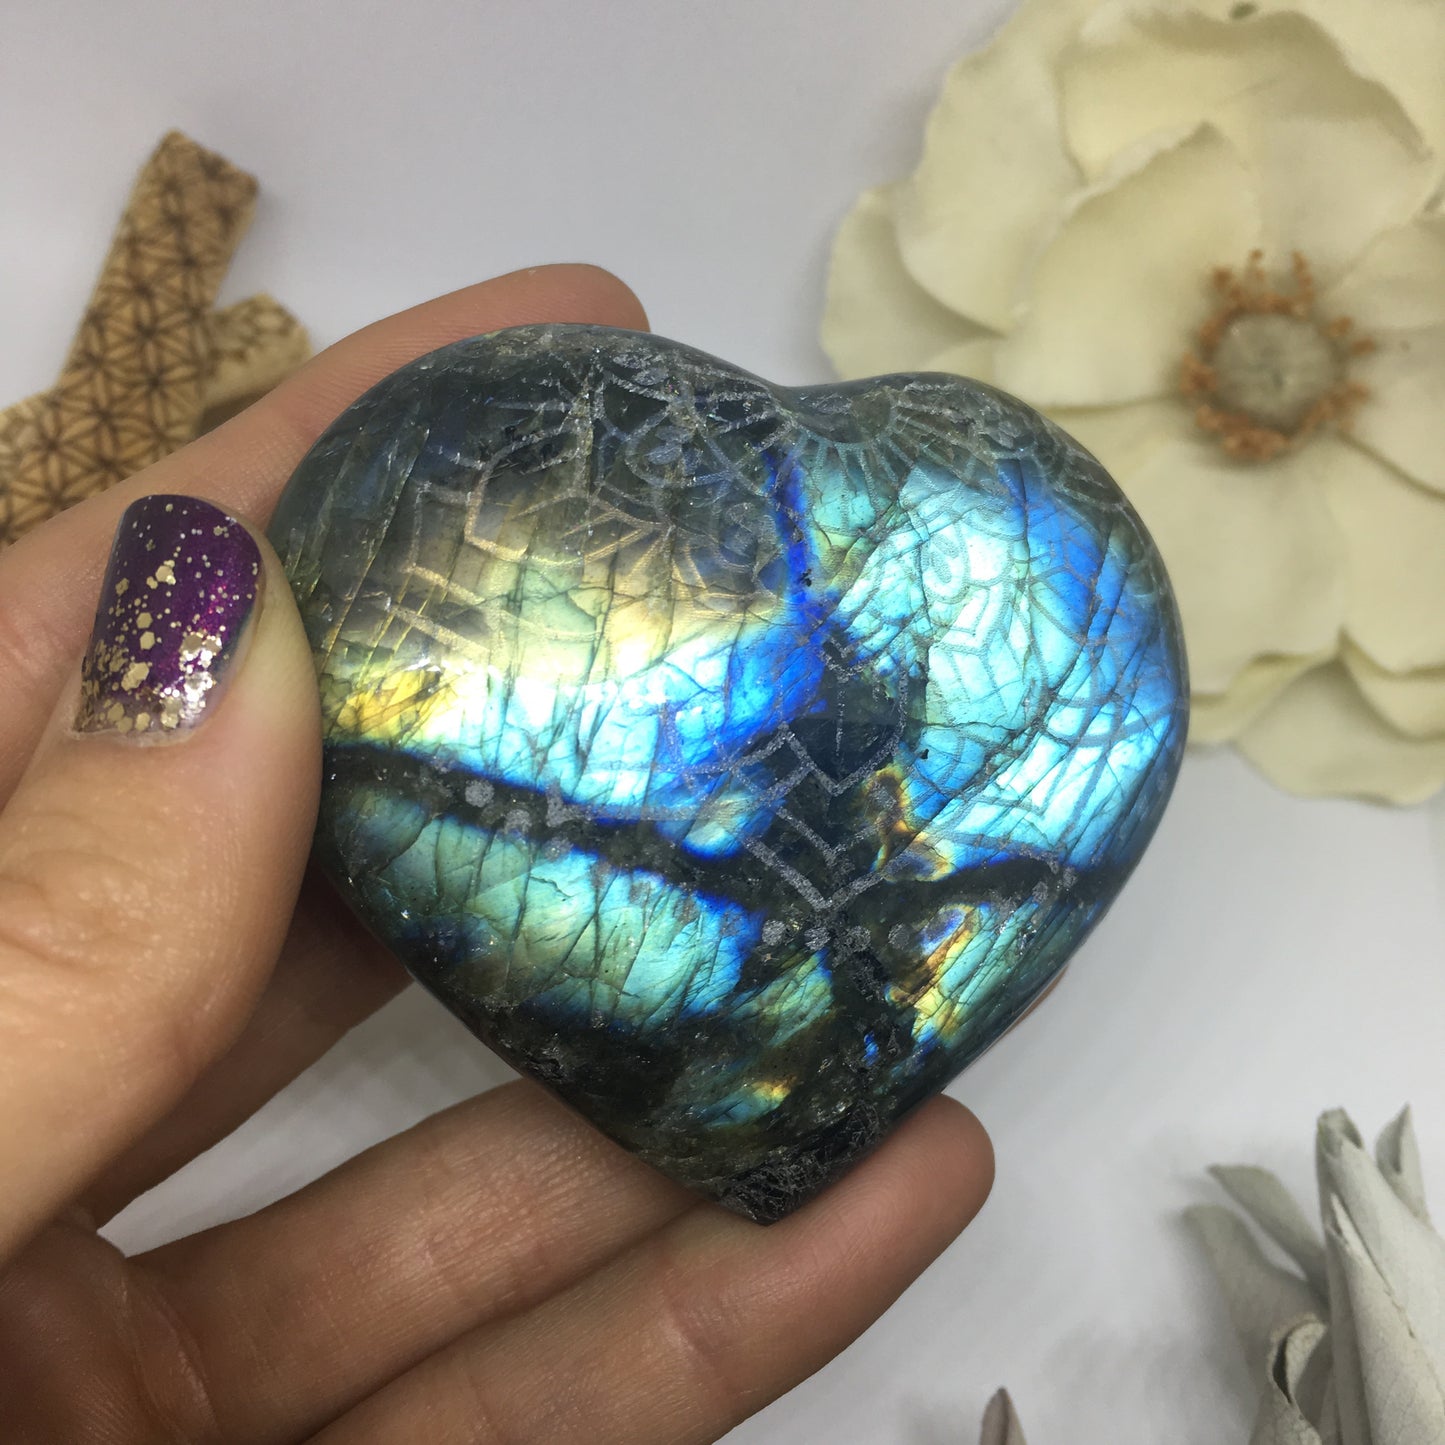 Flashy Blue and Gold Labradorite Heart Etched with Radiate Bliss Mandala 3 - Fractalista Designs